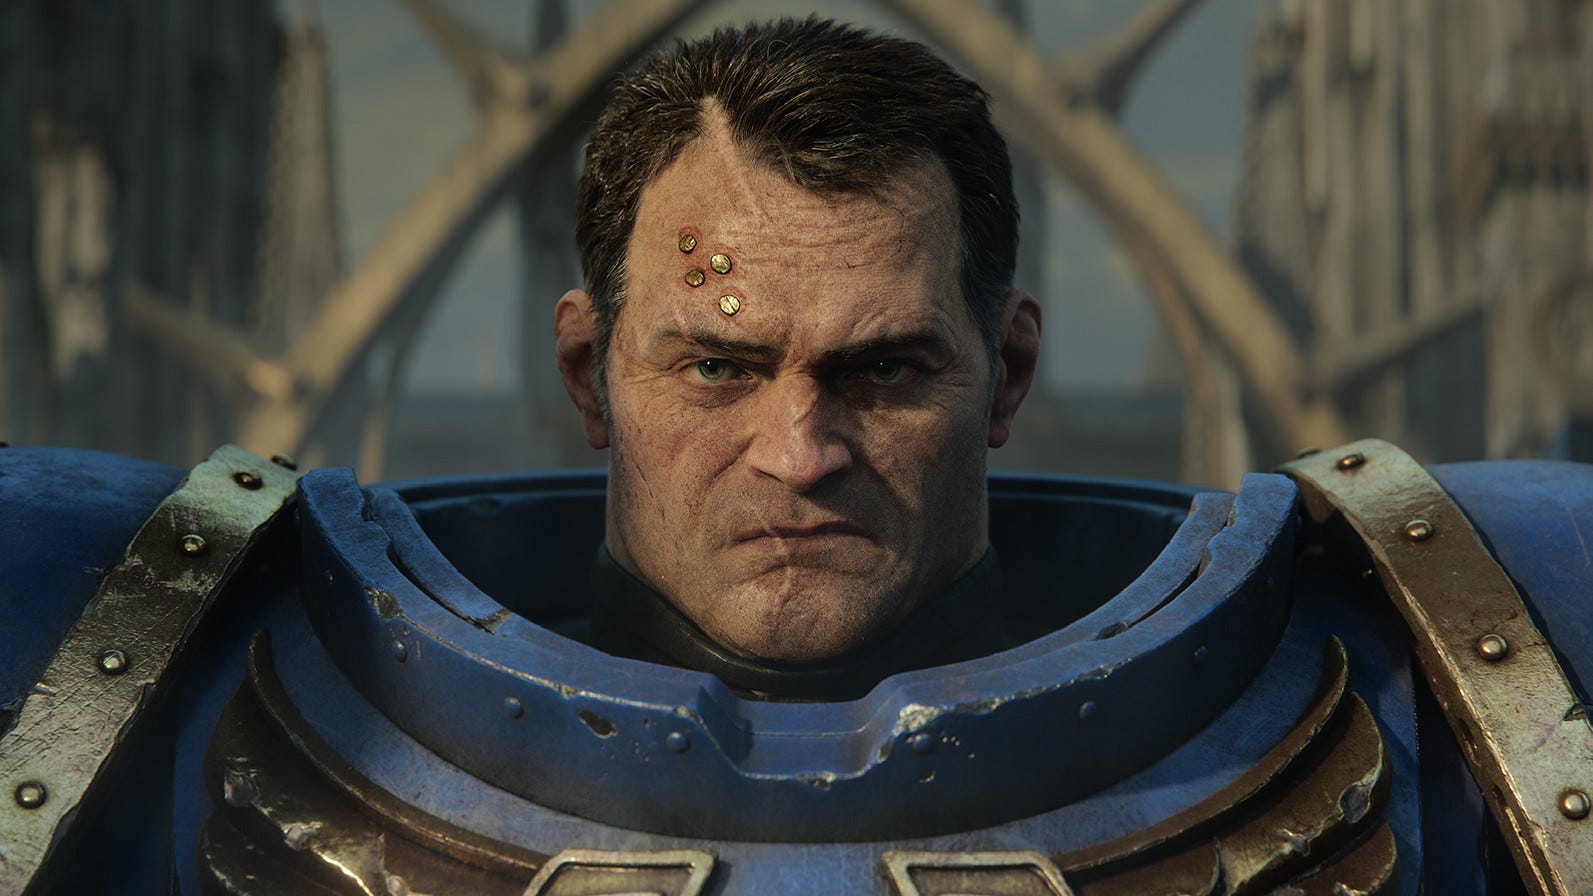 warhammer-40,000:-space-marine-2-has-been-delayed-until-late-2024